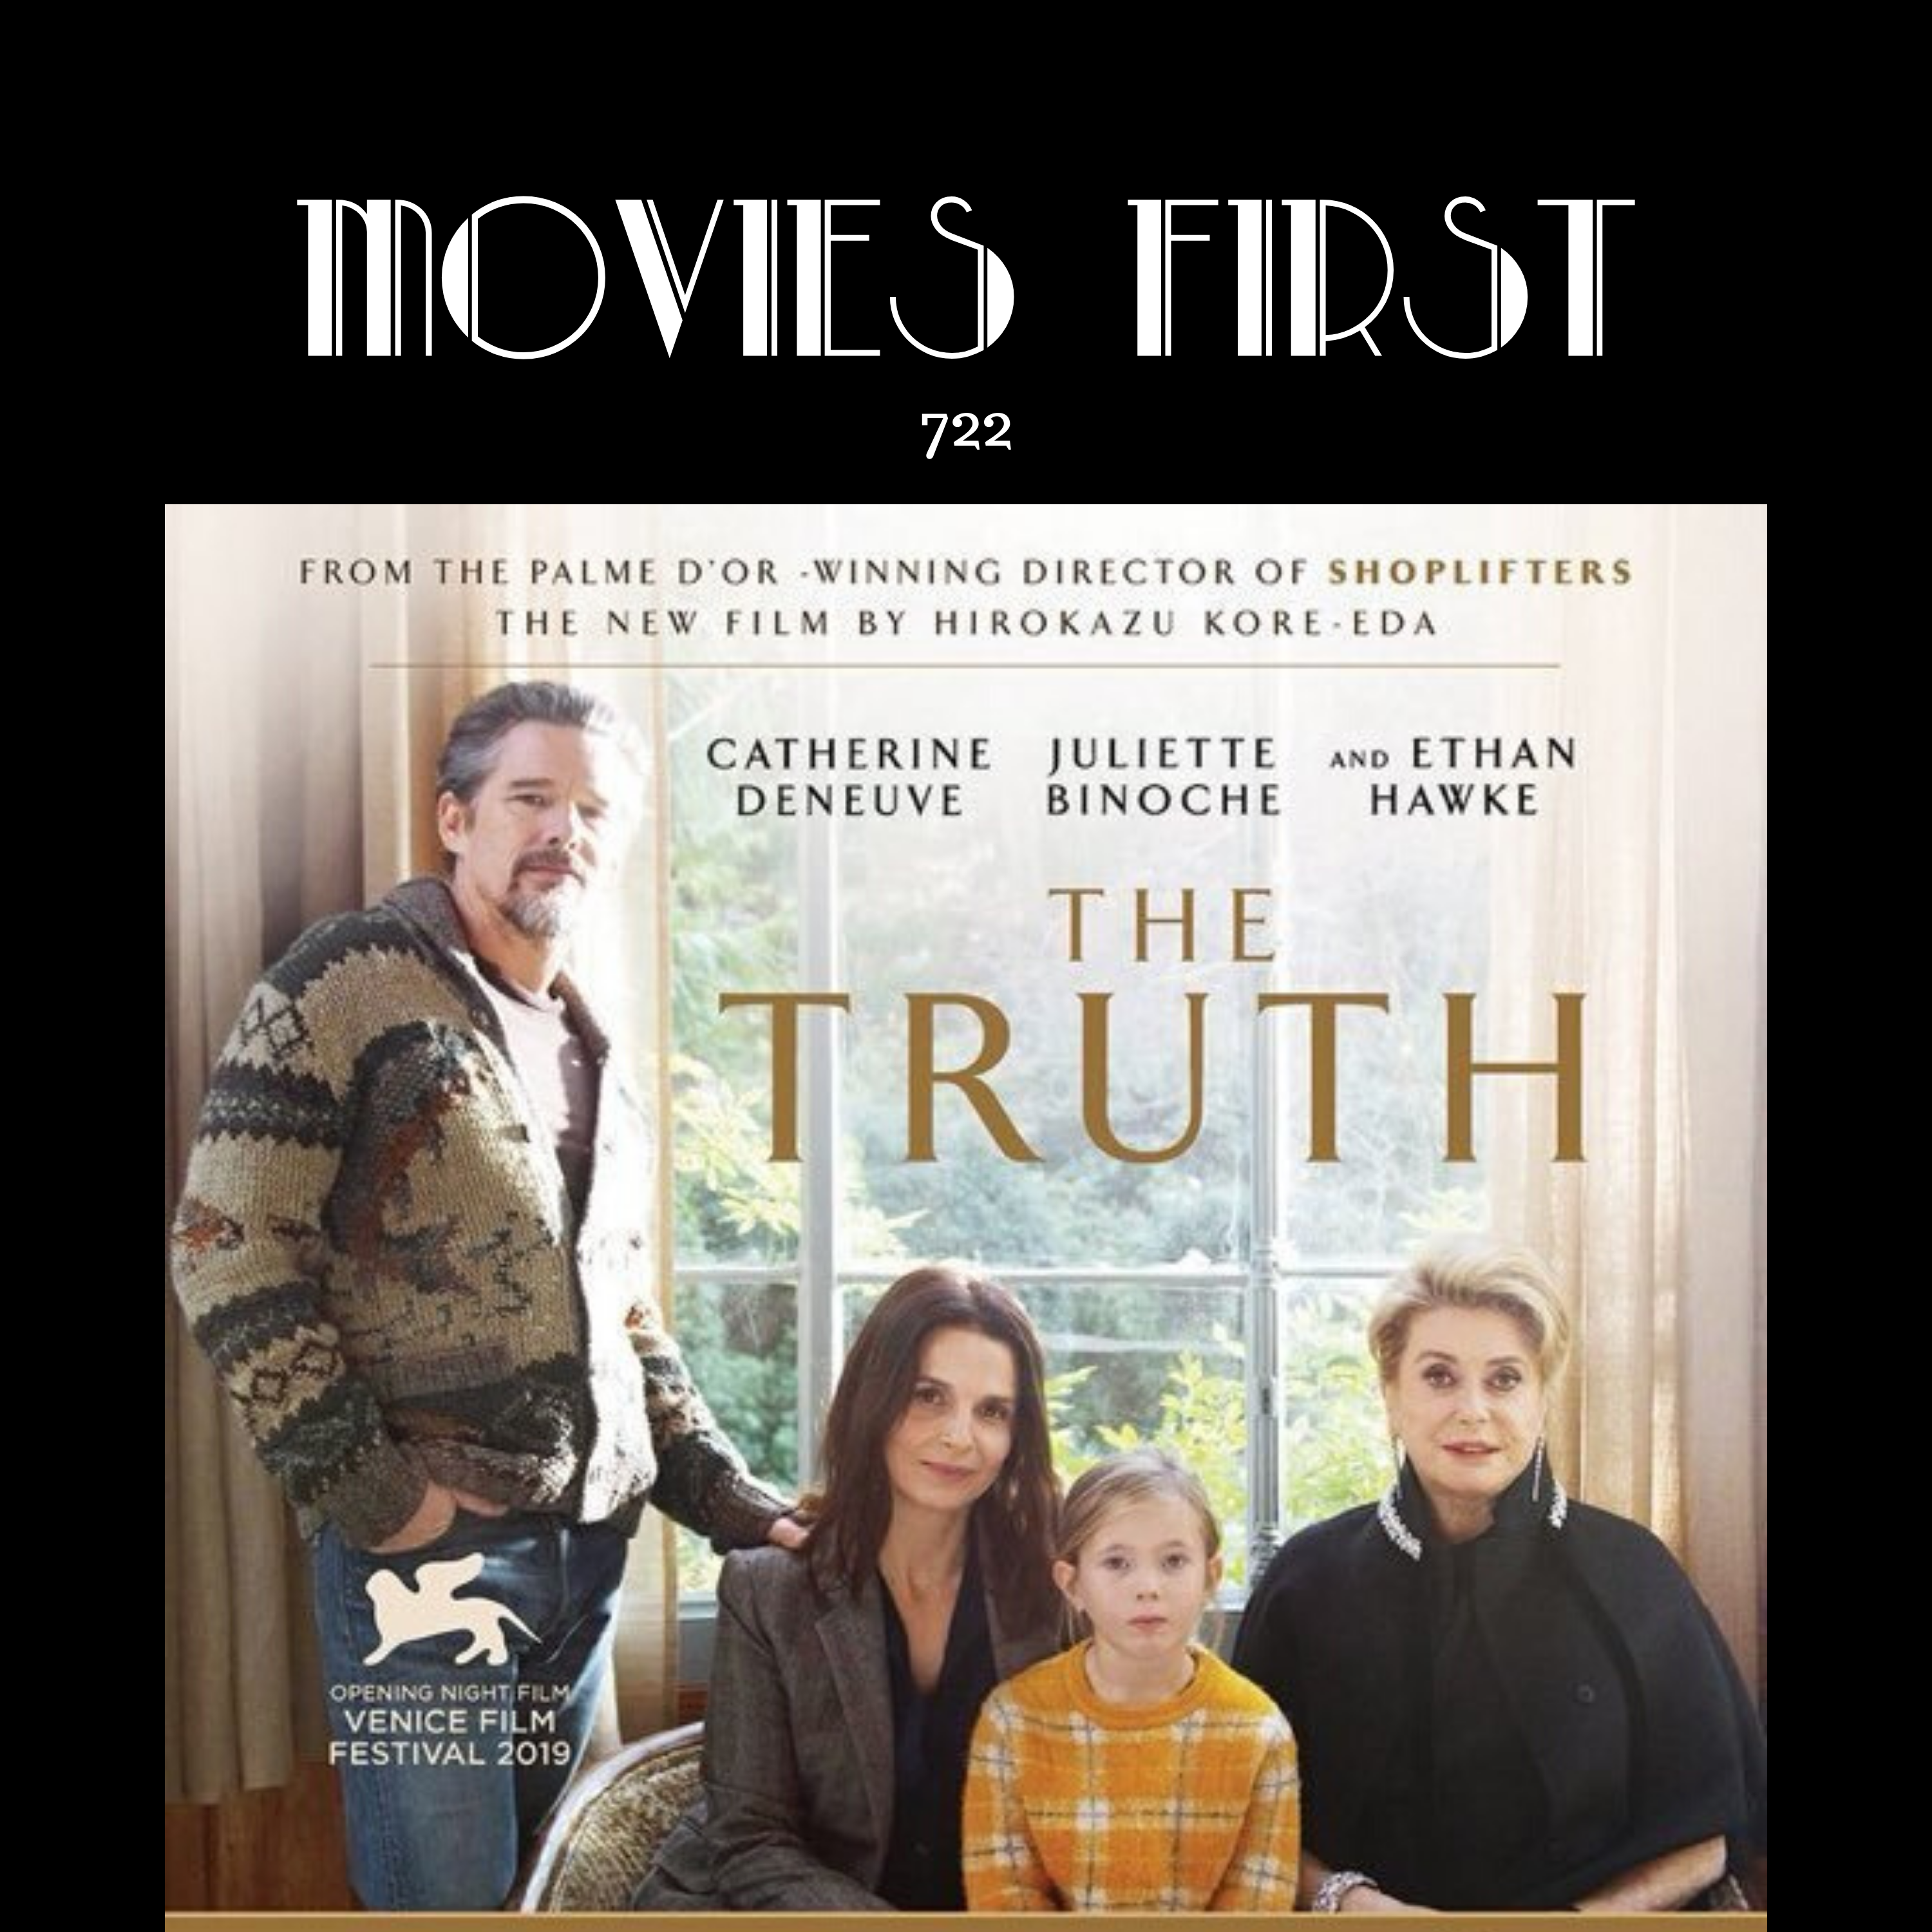 722: The Truth (La vérité ) (Drama) the @MoviesFirst review